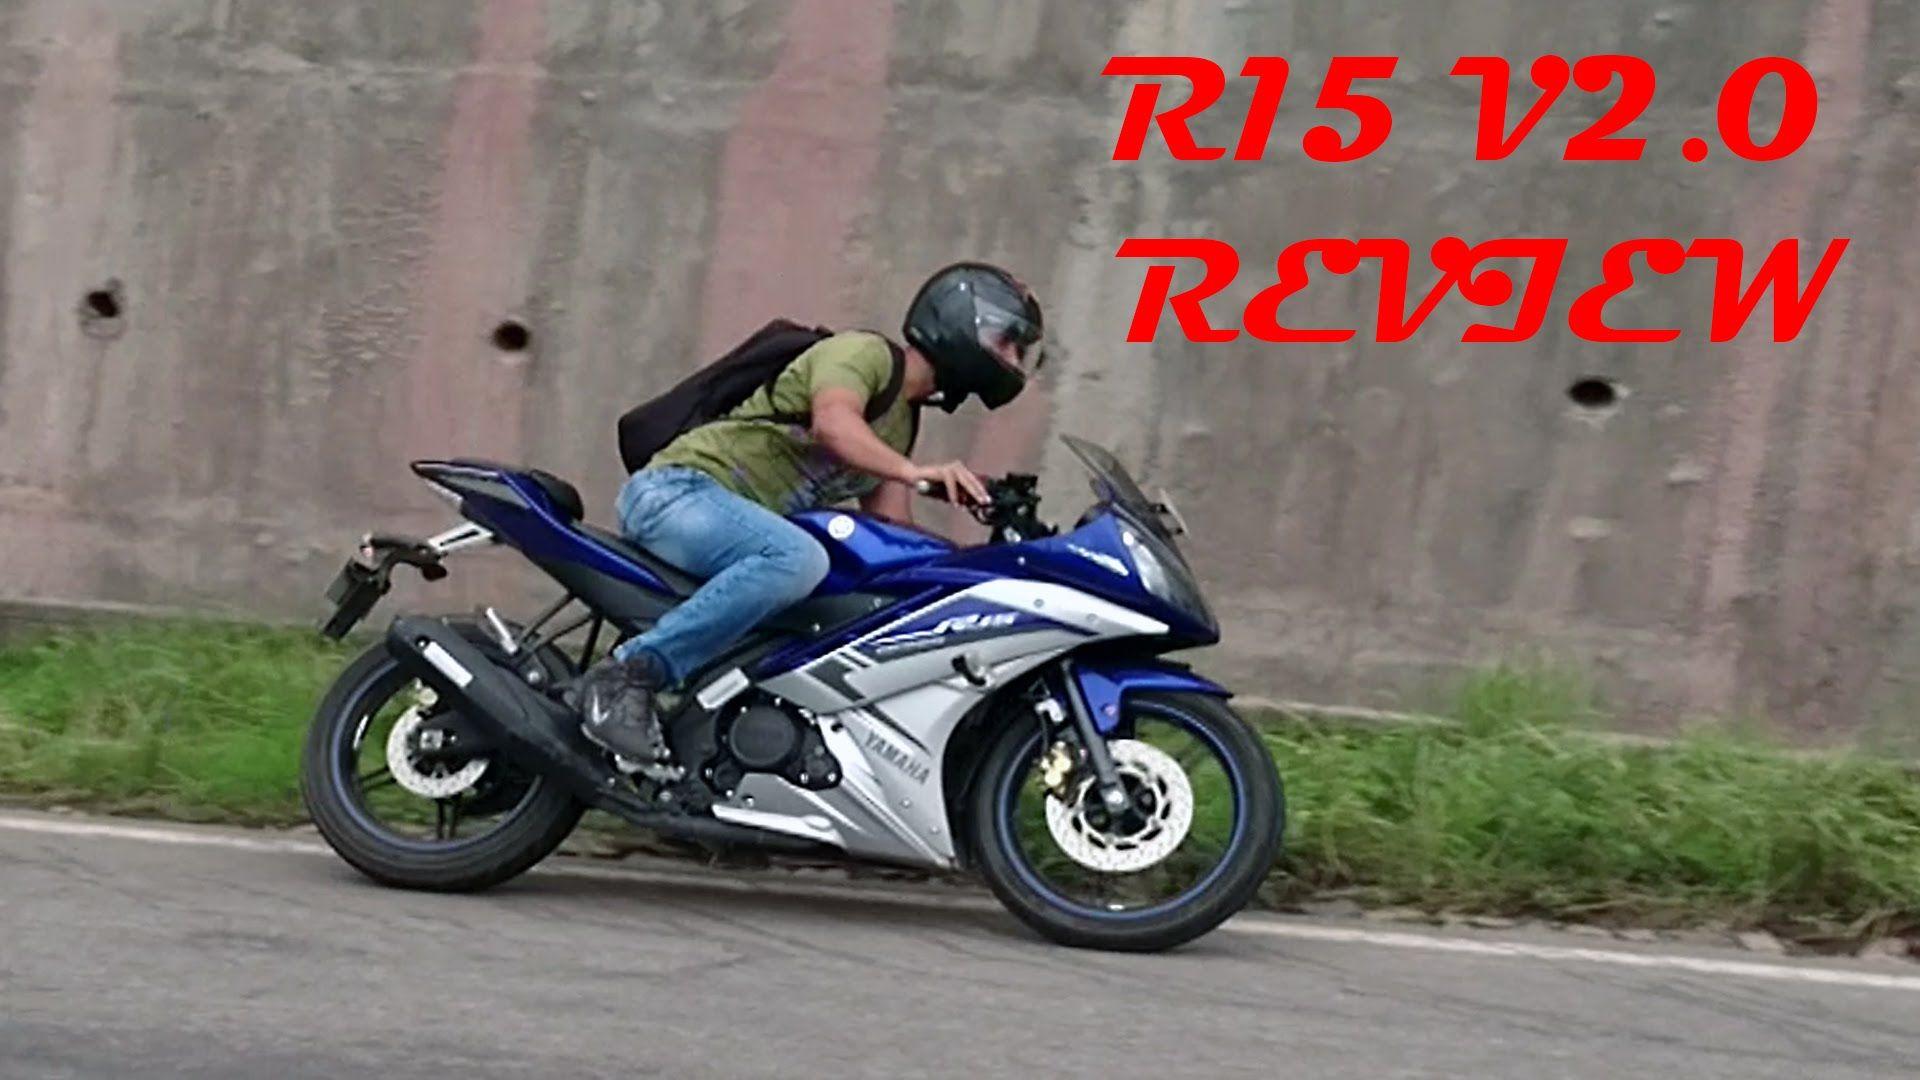 Yamaha YZF R15 VERSION 2.0 REVIEW BY HBR MOTO. SIMPLE BUT